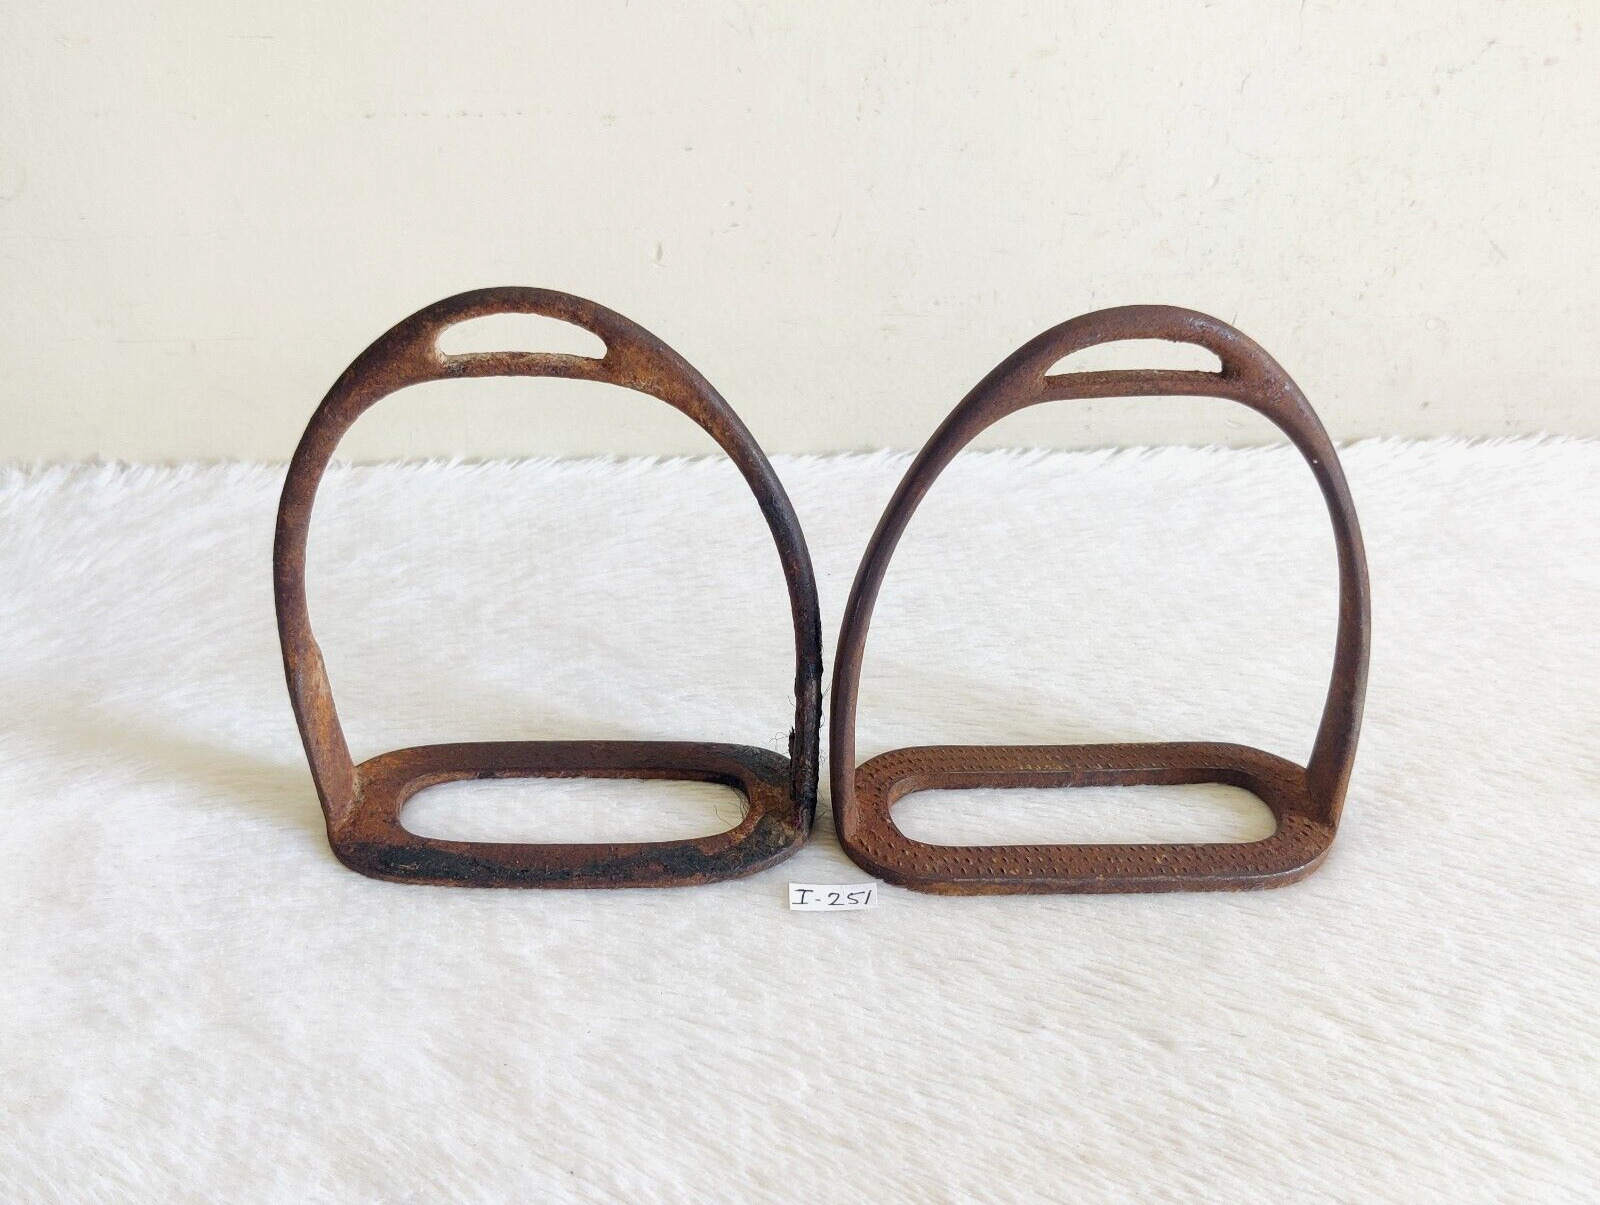 Vintage Iron Horse Foot Rest Pair Paddle Stirrup Decorative Collectible I251